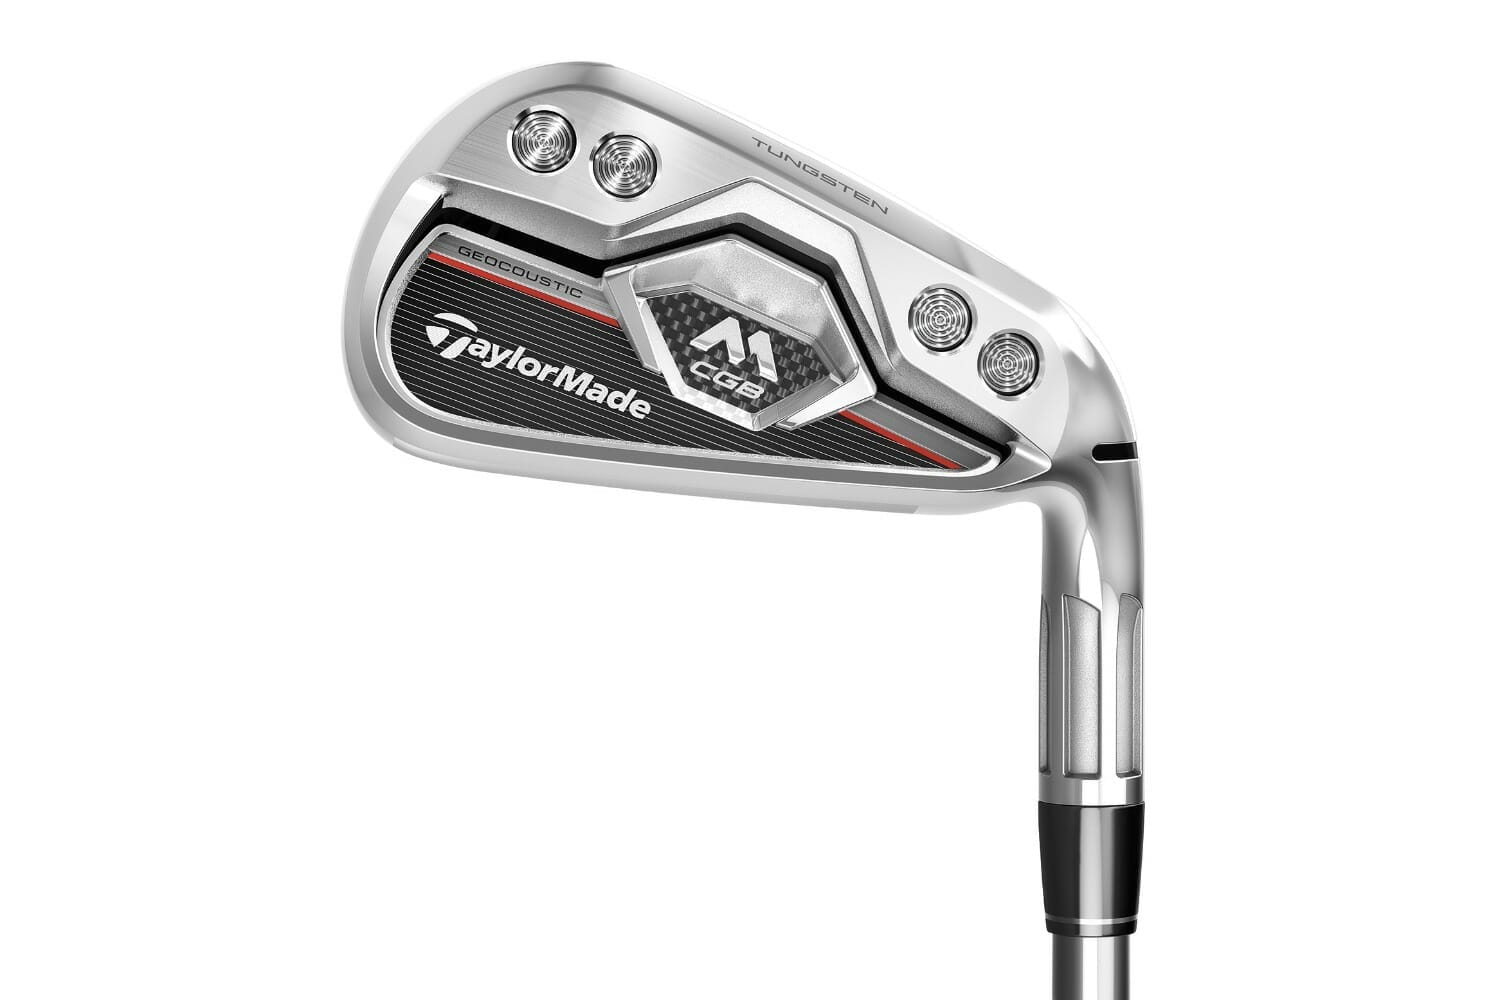 TaylorMade complete 2018 Iron lineup with M CGB Irons